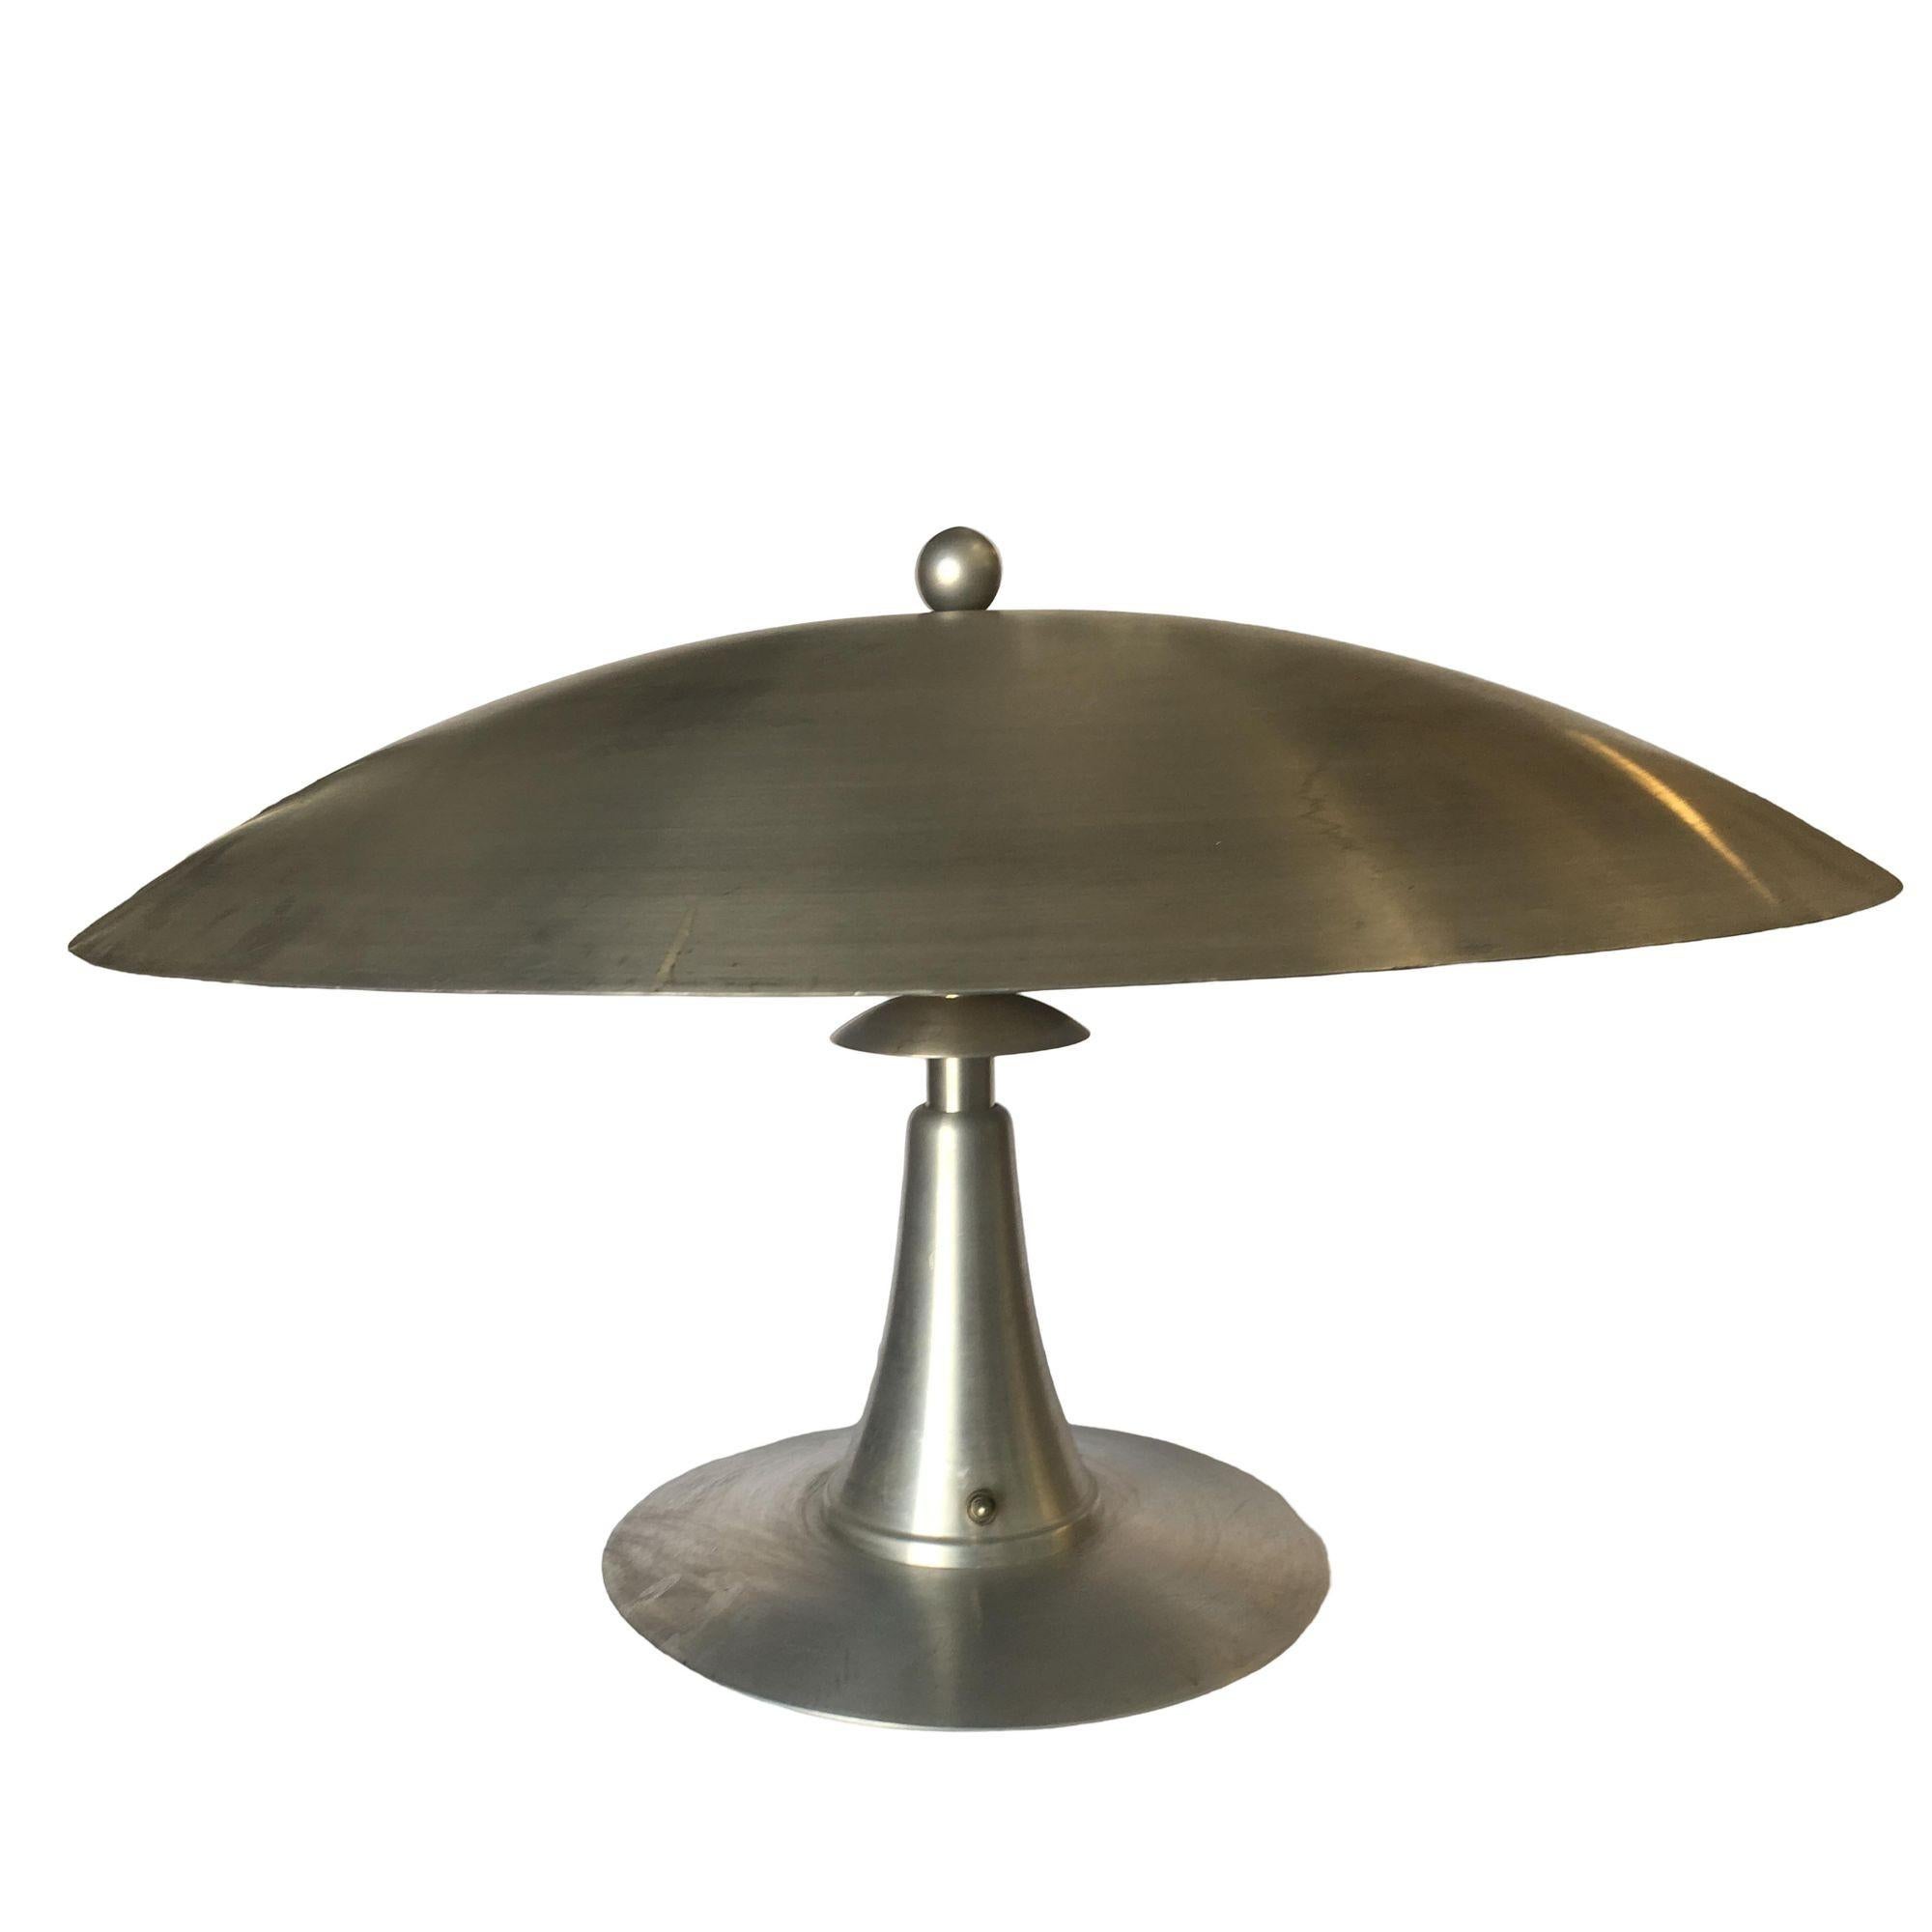 This stunning aluminum Art Deco style table lamp features a large 23